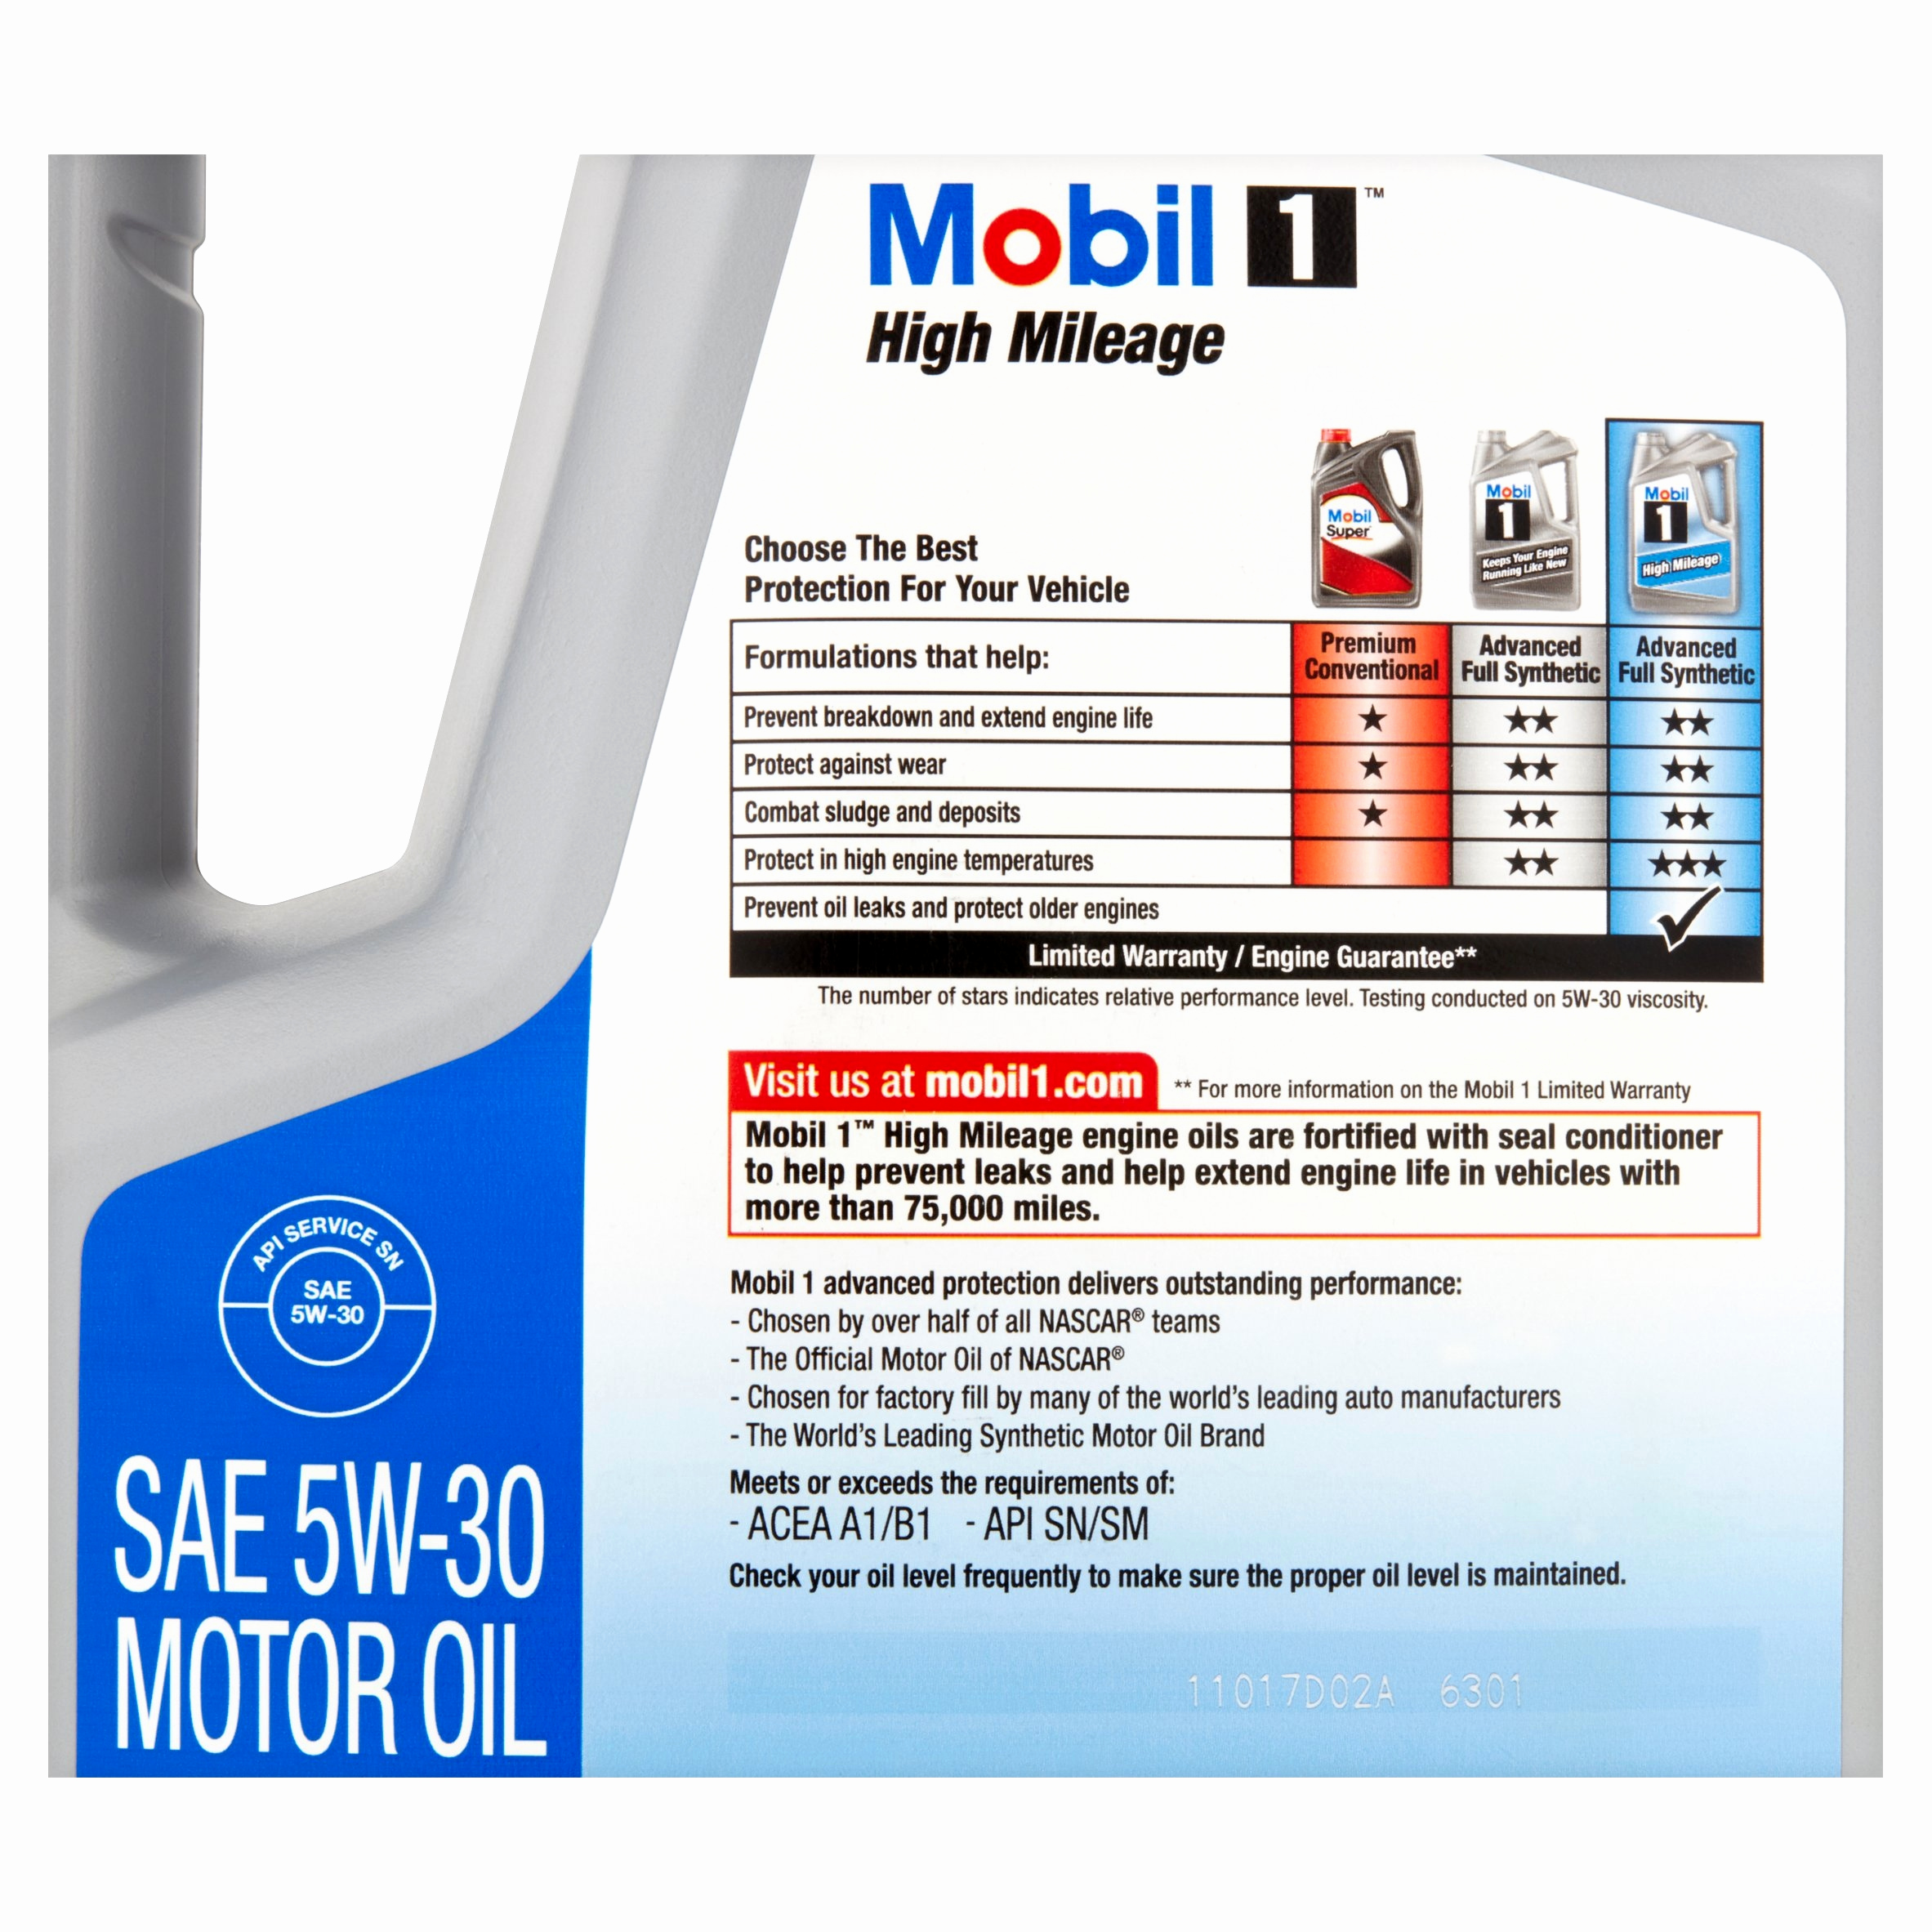 Acord 35 Lovely Acord 35 Awesome Mobil 1 5w 30 High Mileage Full Synthetic Motor Oil